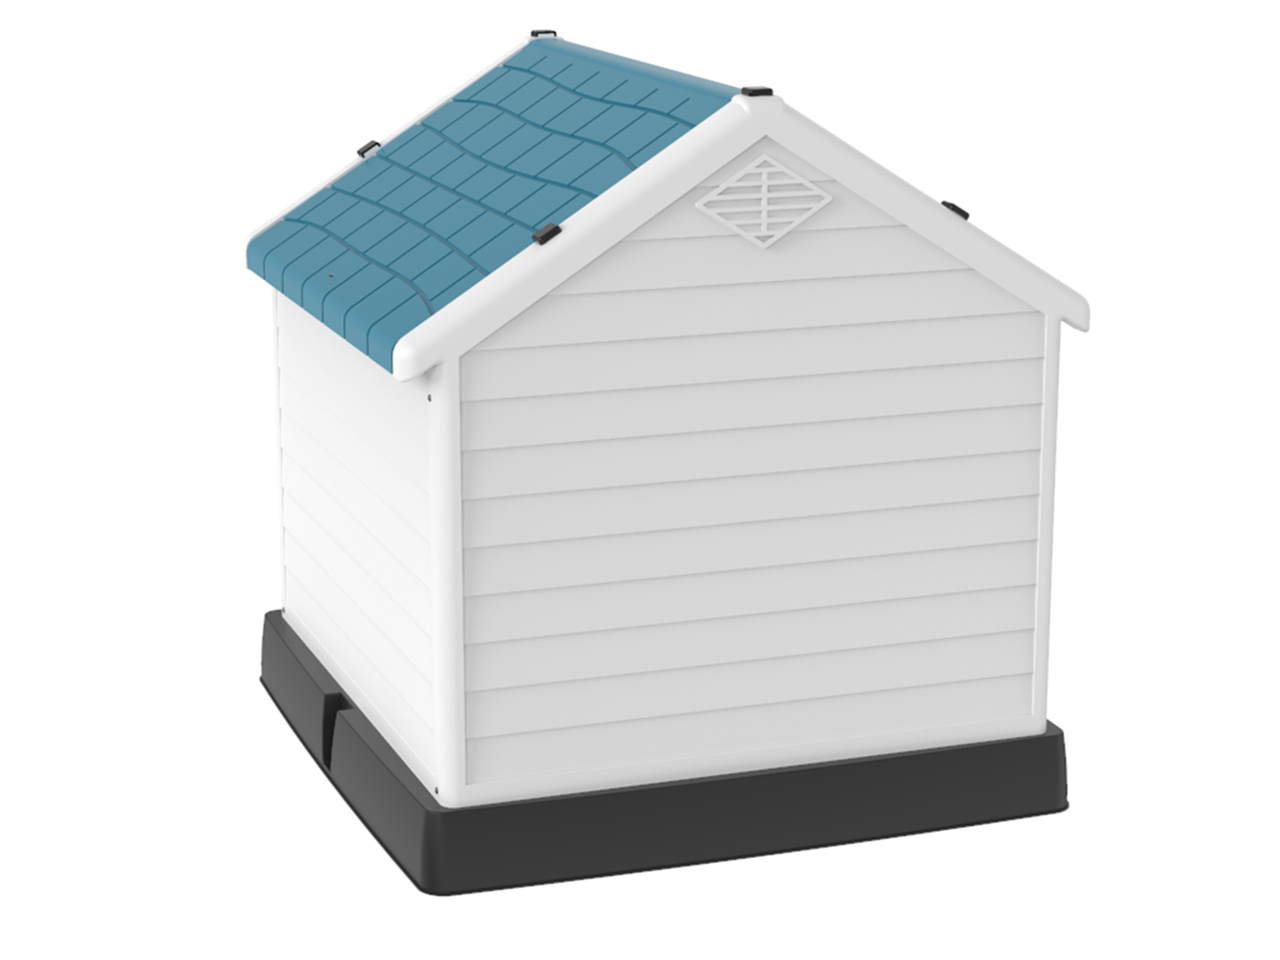  Qily Plastic Dog House Outdoor for Small Medium Dogs